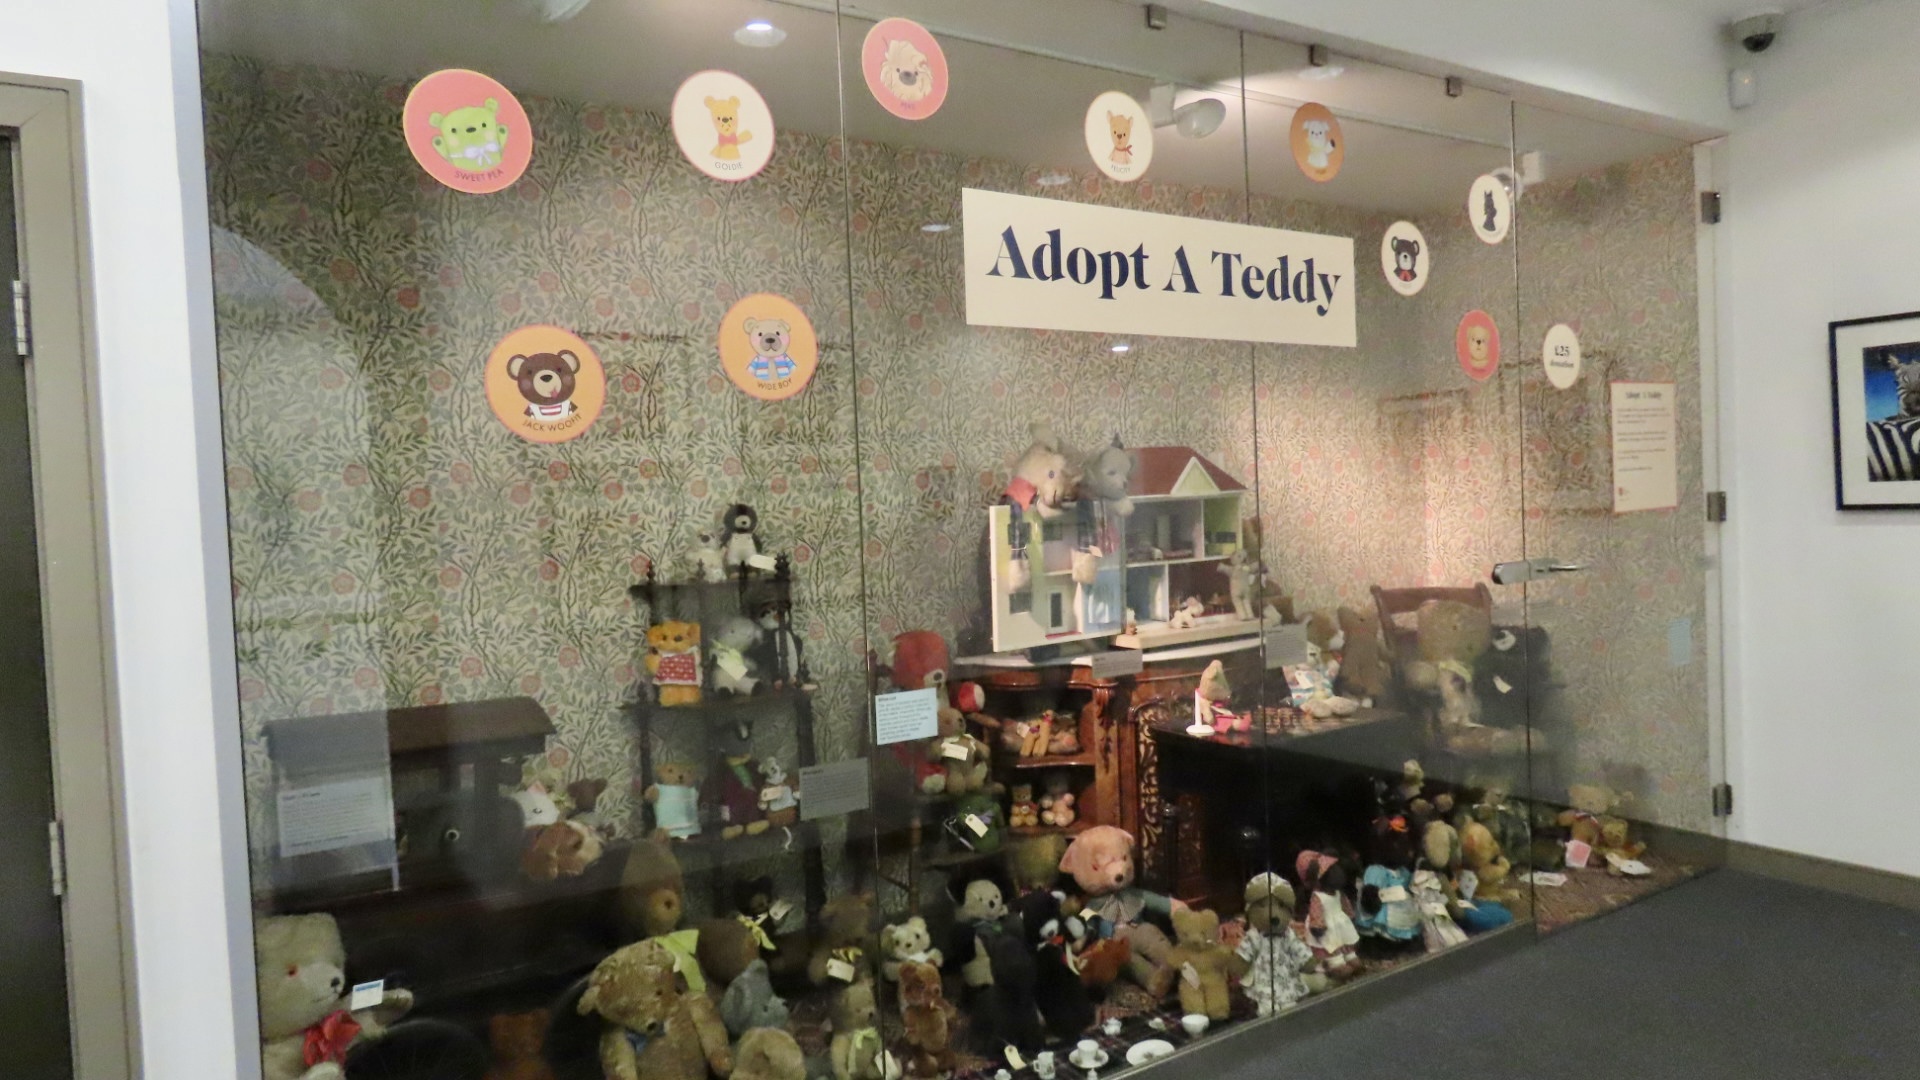 People are invited to adopt a teddy from the museum collection at The Atkinson in Southport to support the charitable work of The Atkinson Development Trust. Photo by Andrew Brown Stand Up For Southport 